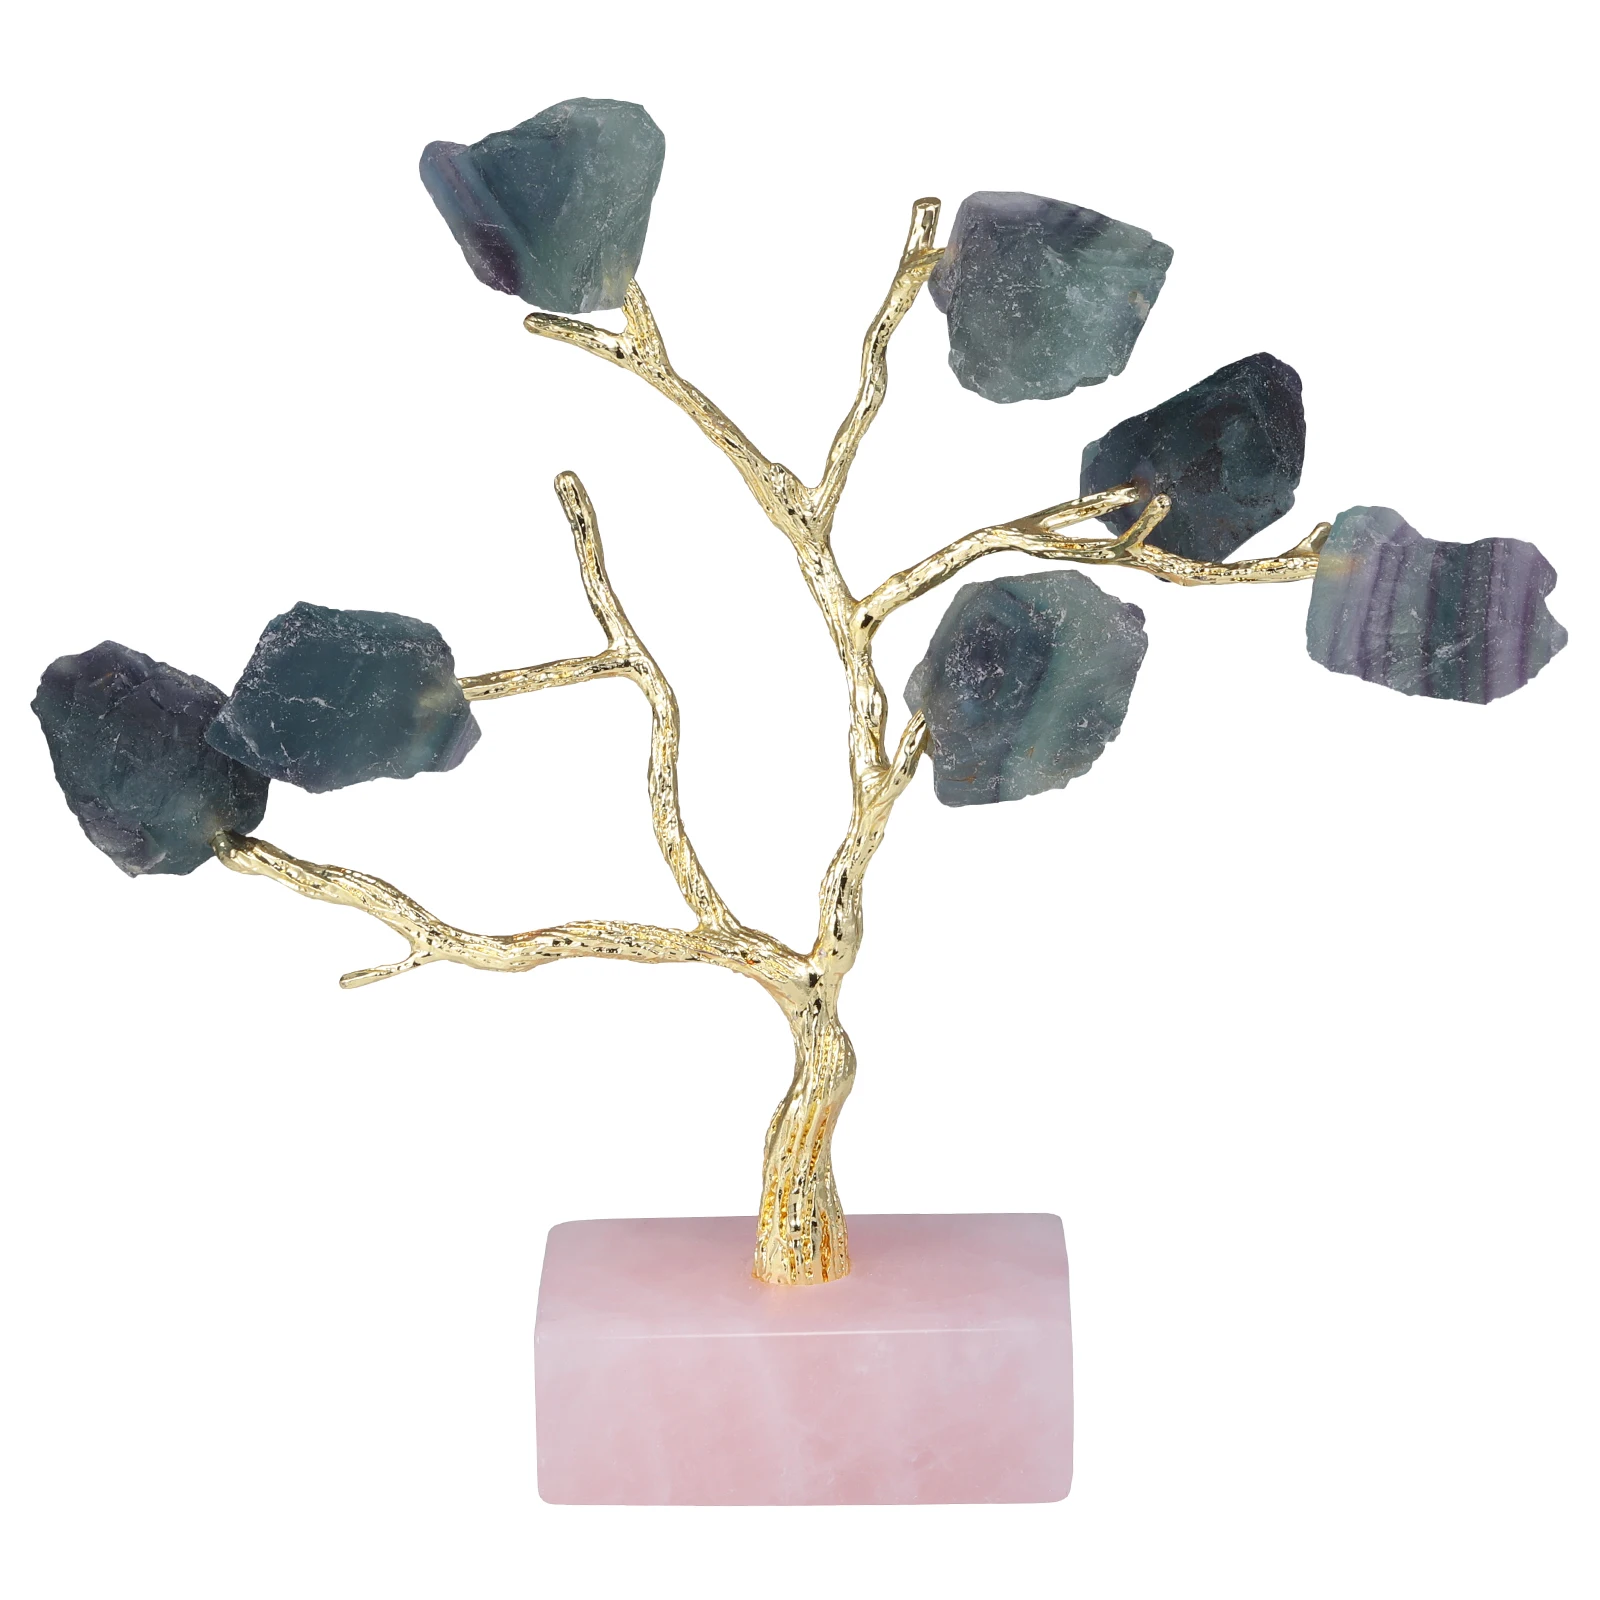 Natural Rough Crystal Stone Tree With Rose Quartz Base Healing Gemstone Golden Tree For Jewelry Organizer Home Table Decoration natural crystal stone star moon shape hanging ornament reiki healing gemstone wall decor for window home decoration